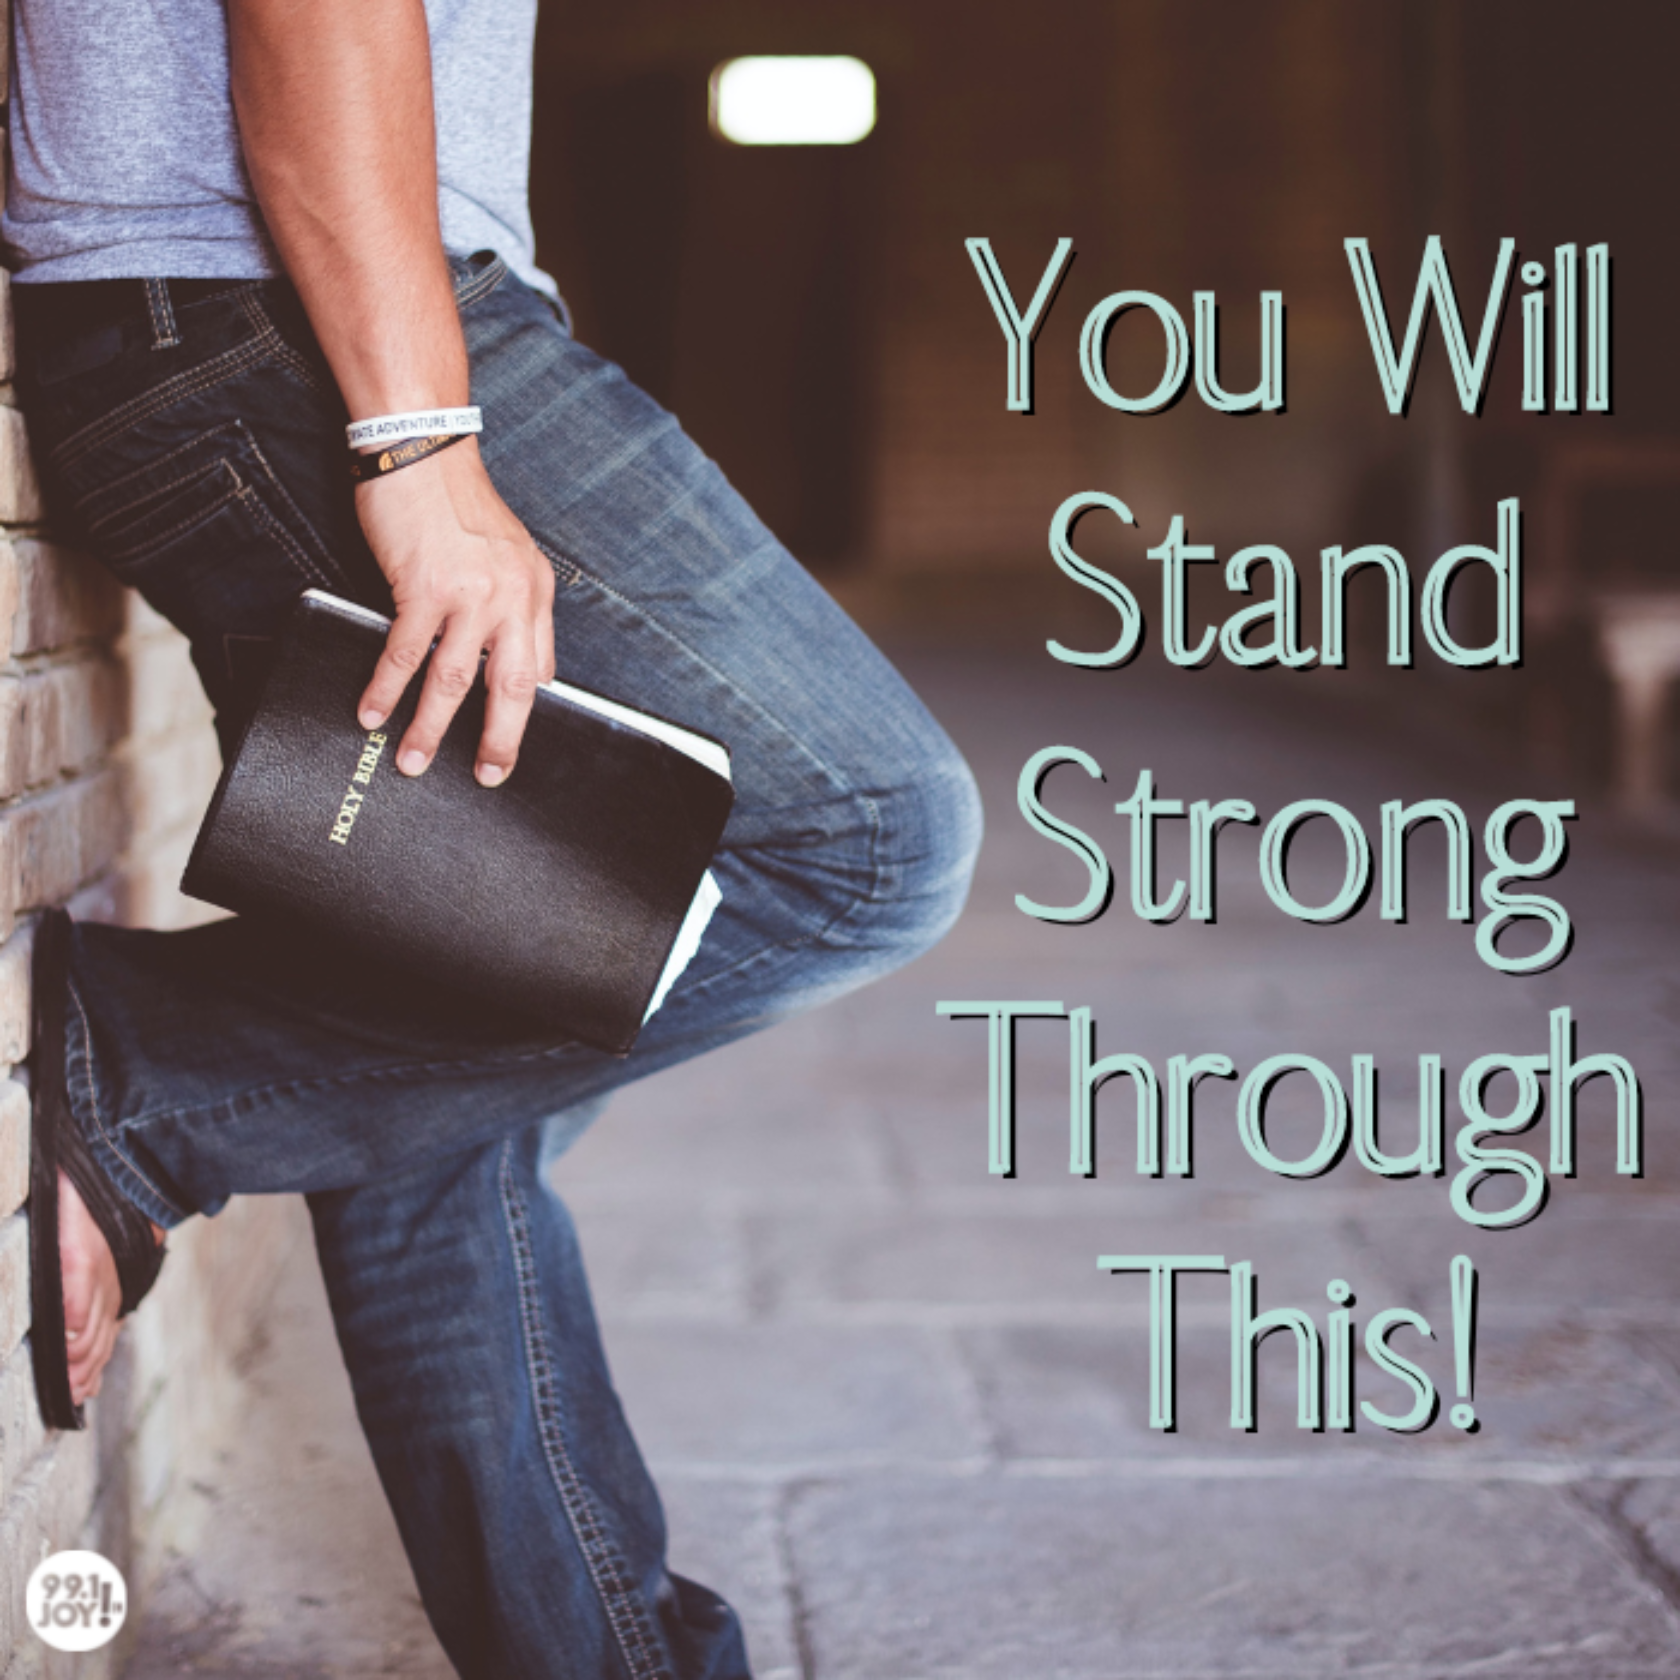 You Will Stand Strong Through This!